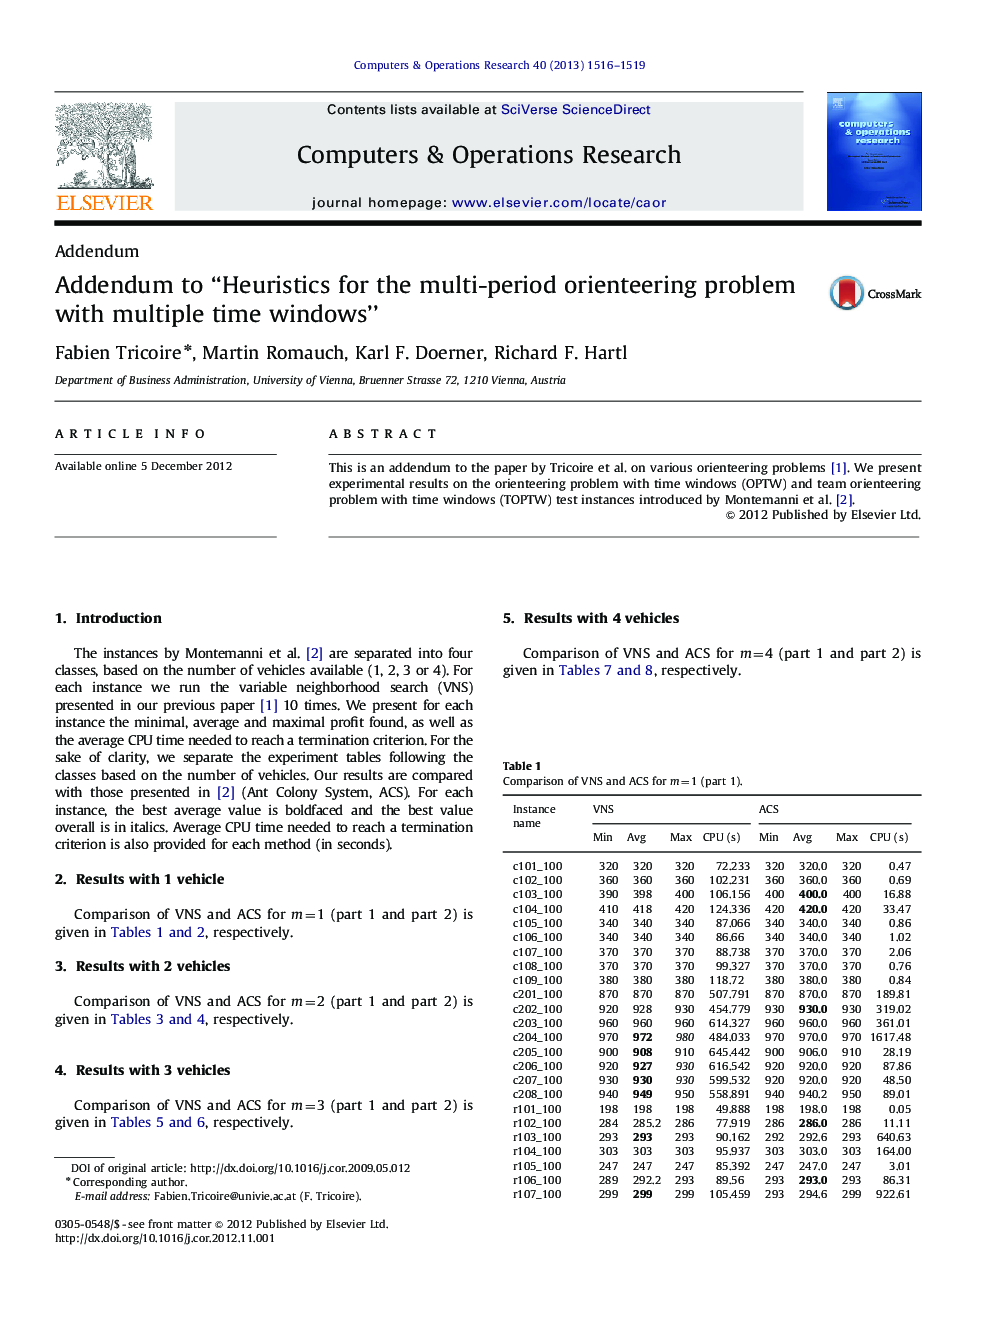 Addendum to “Heuristics for the multi-period orienteering problem with multiple time windows”